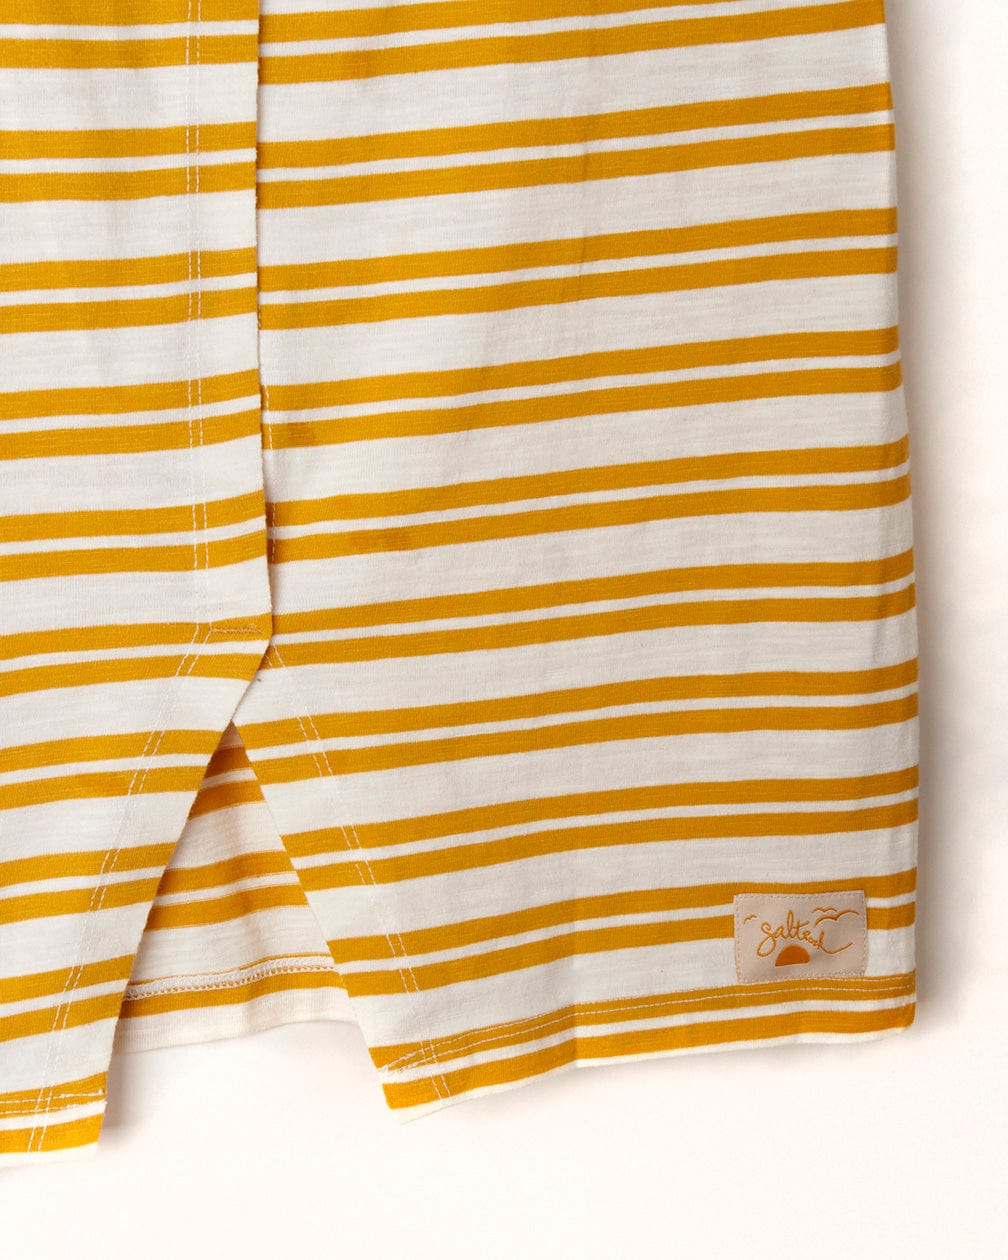 White fabric with yellow yarn dye stripe print and a small embroidered palm tree on the lower corner of the Saltrock Sky - Womens Short Sleeve T-Shirt - Yellow.